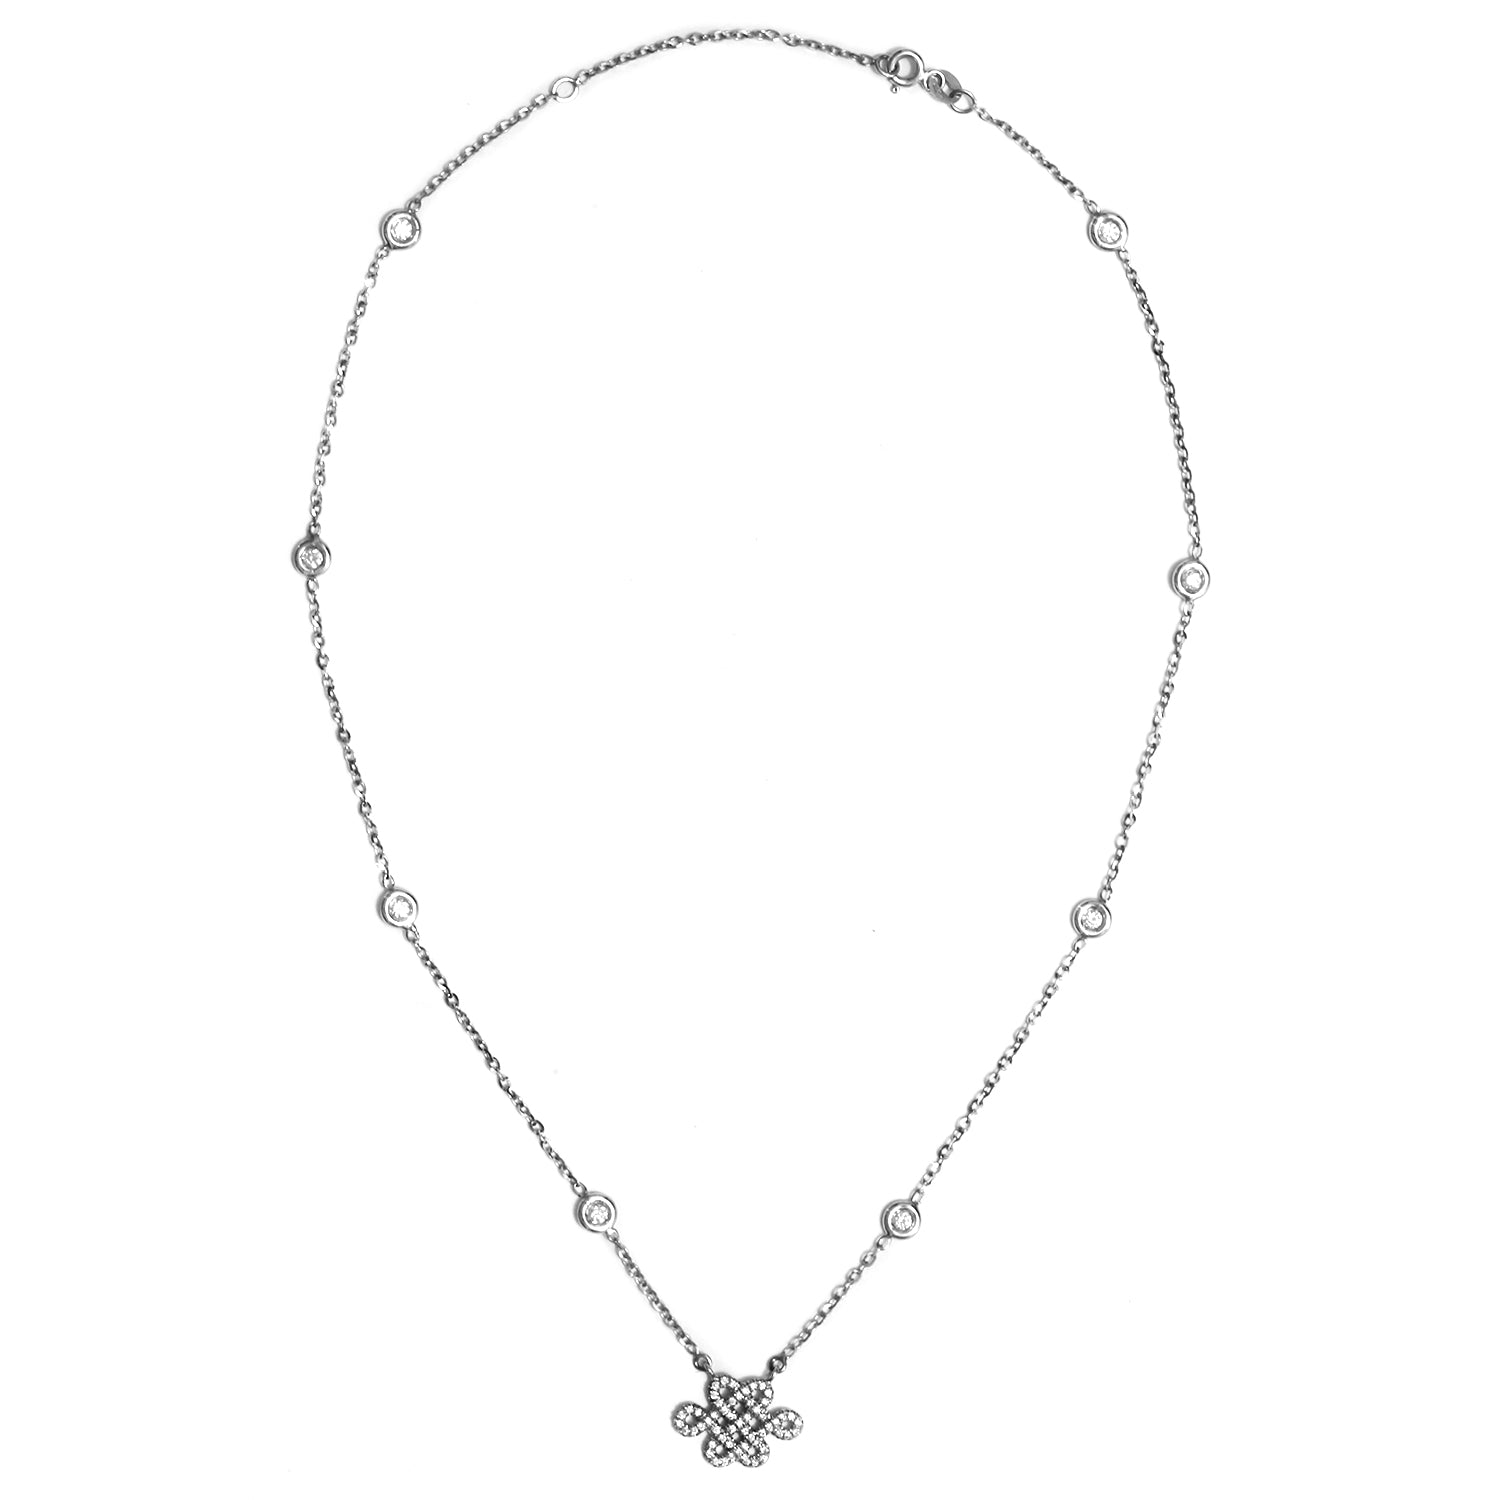 Tibetan Endless Love Knot Diamond by the yard Necklace ♥